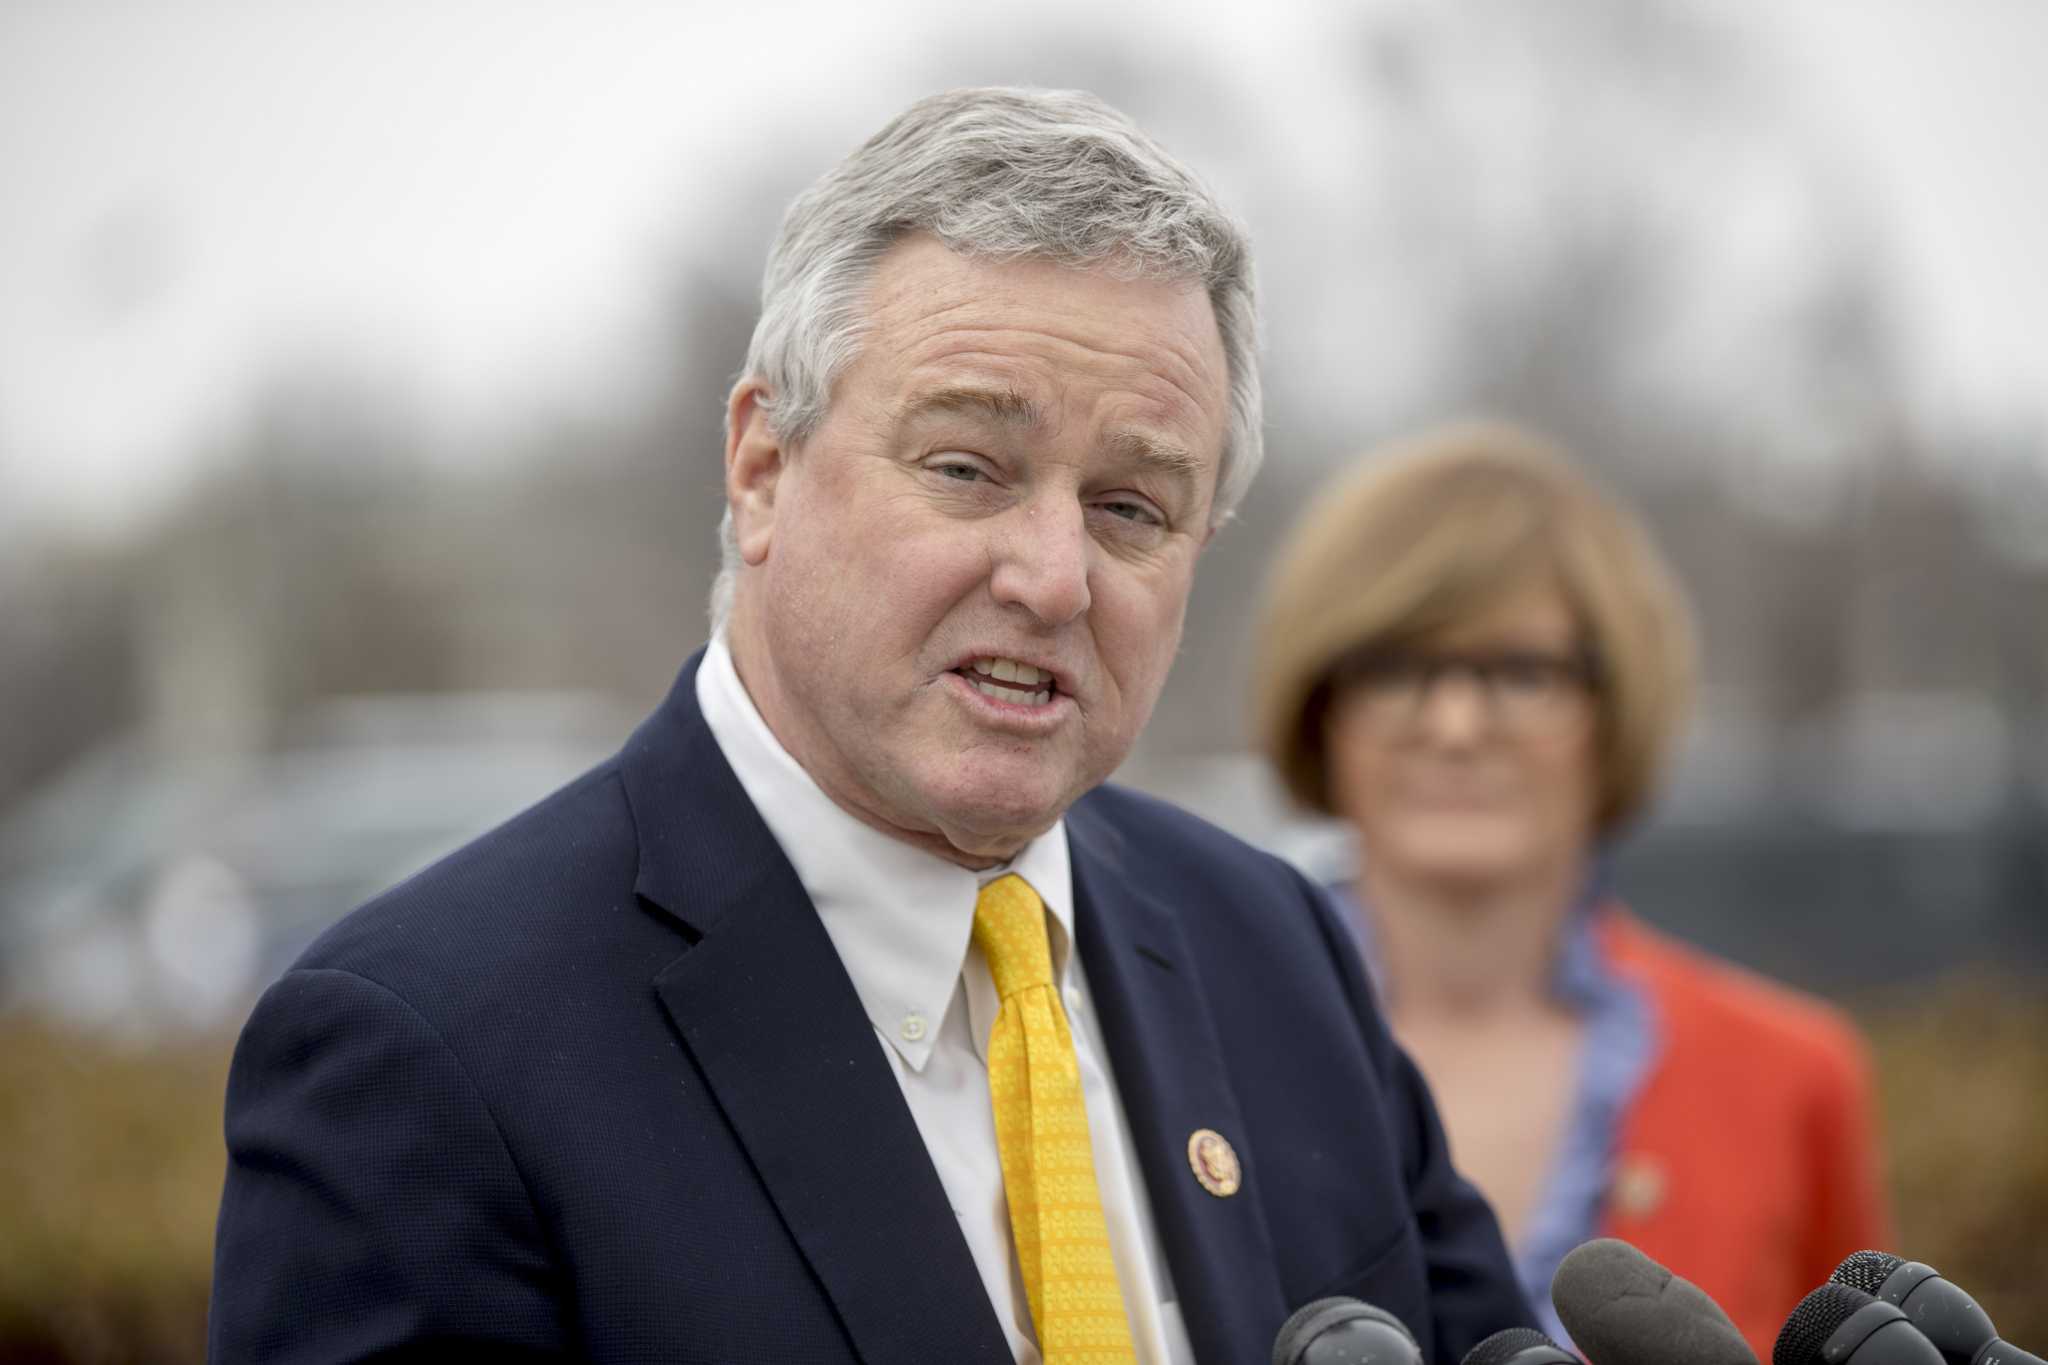 Maryland US Rep. David Trone apologizes for using racial slur at